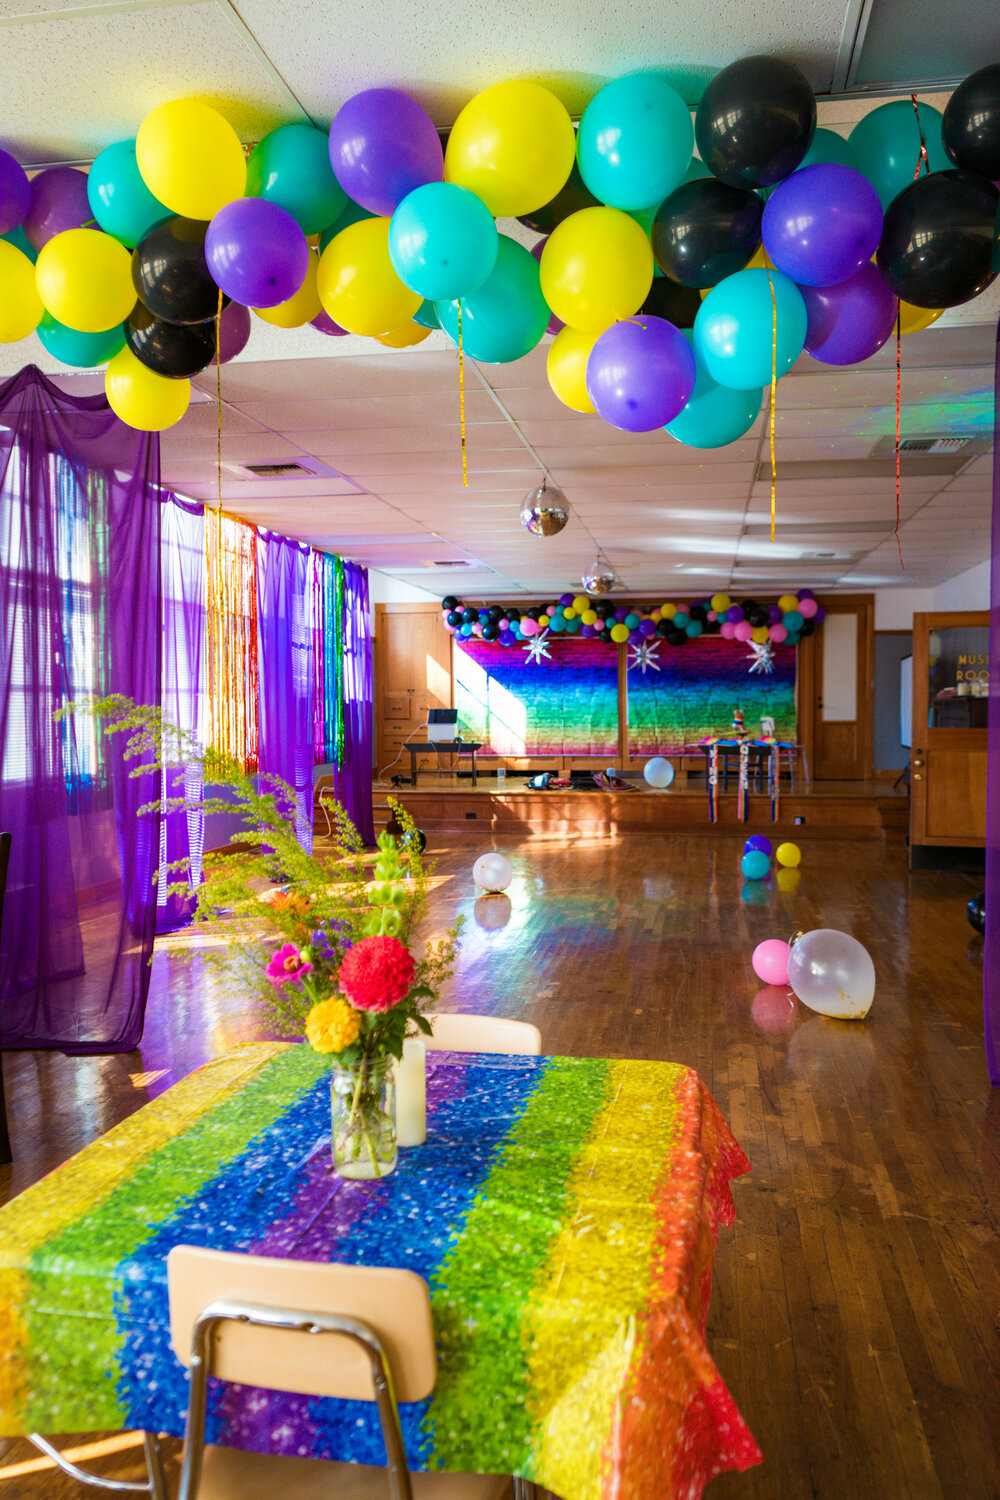 Mineral School is decorated for Queer Prom on Saturday, Sept. 9.